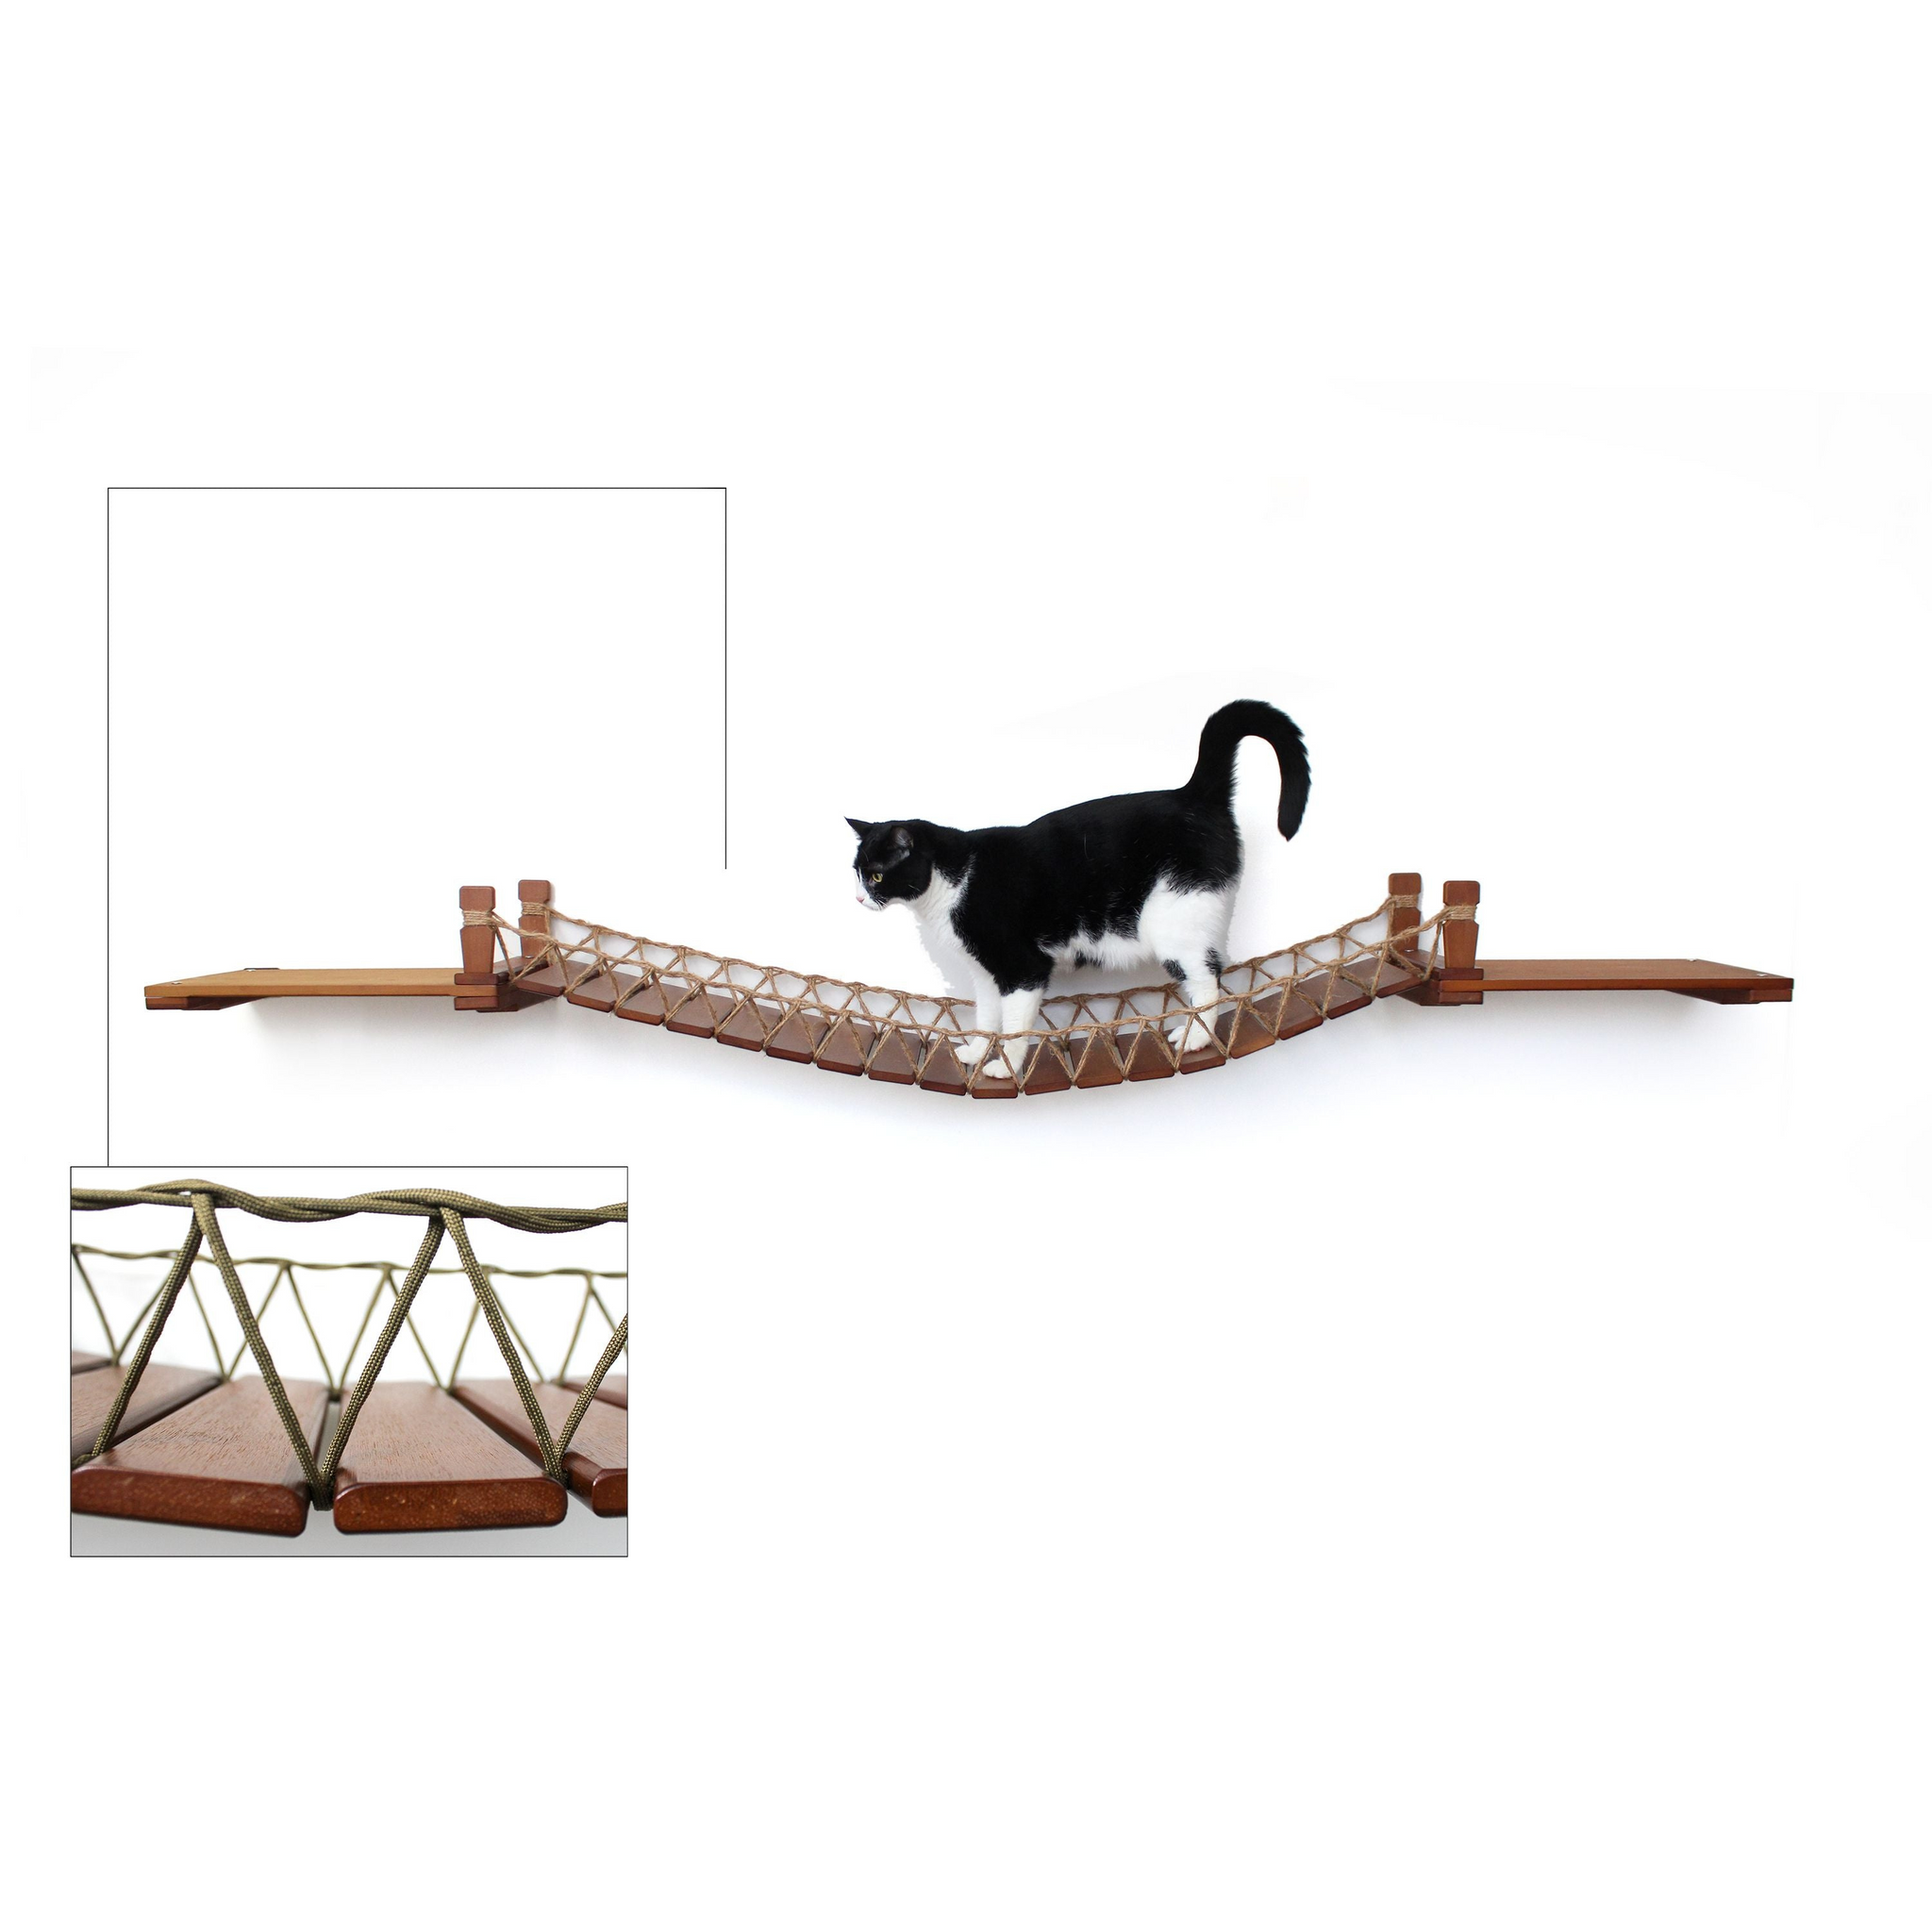 Cat Suspension Bridge - Cat Shelf Set (Wall Mounted) by Catastrophic Creations